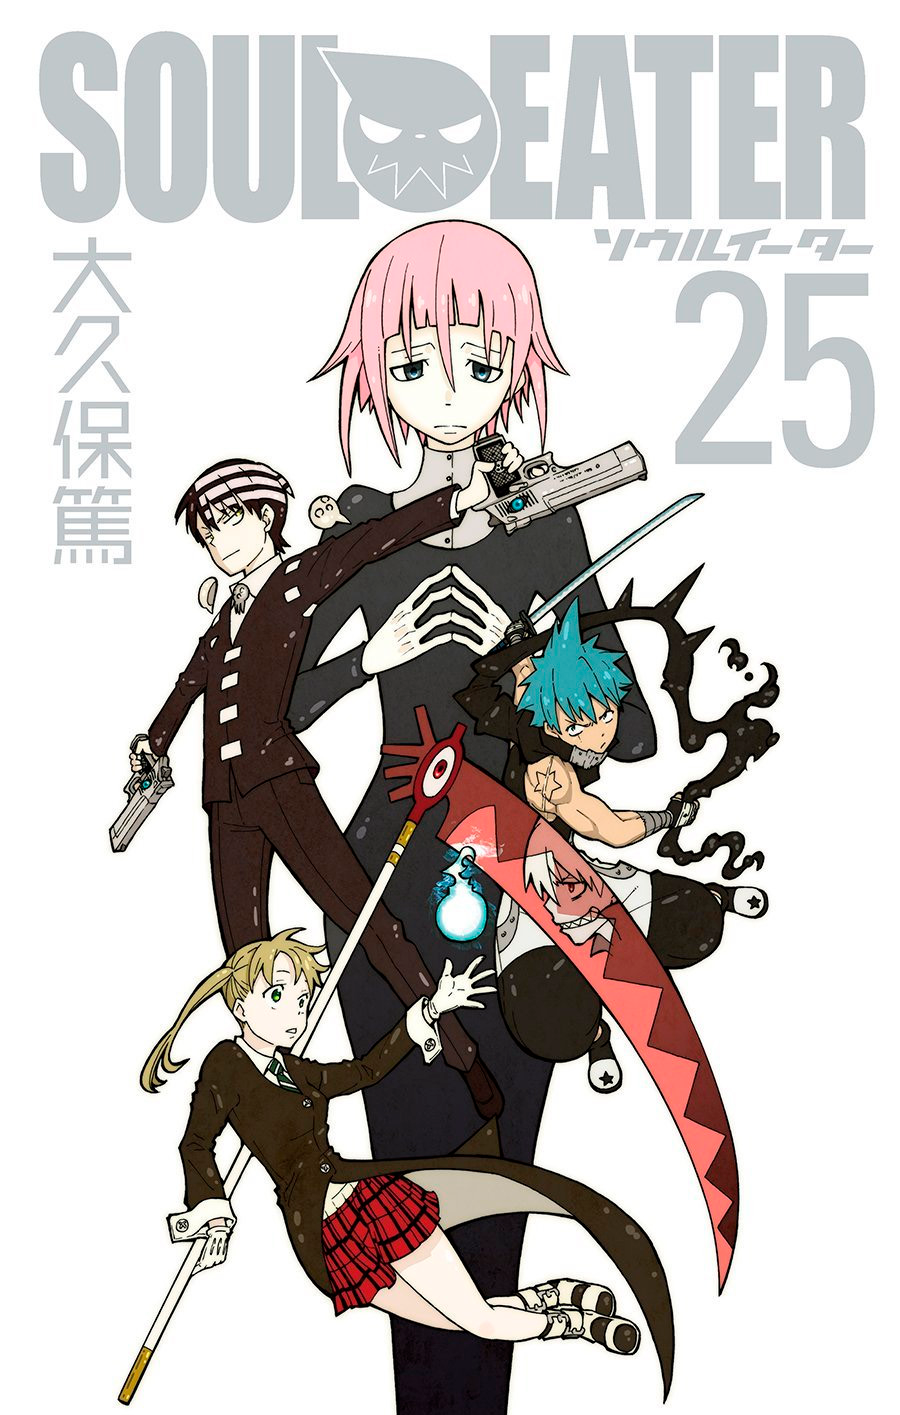 FUNimation Adds Soul Eater Anime from Media Factory (Update 2